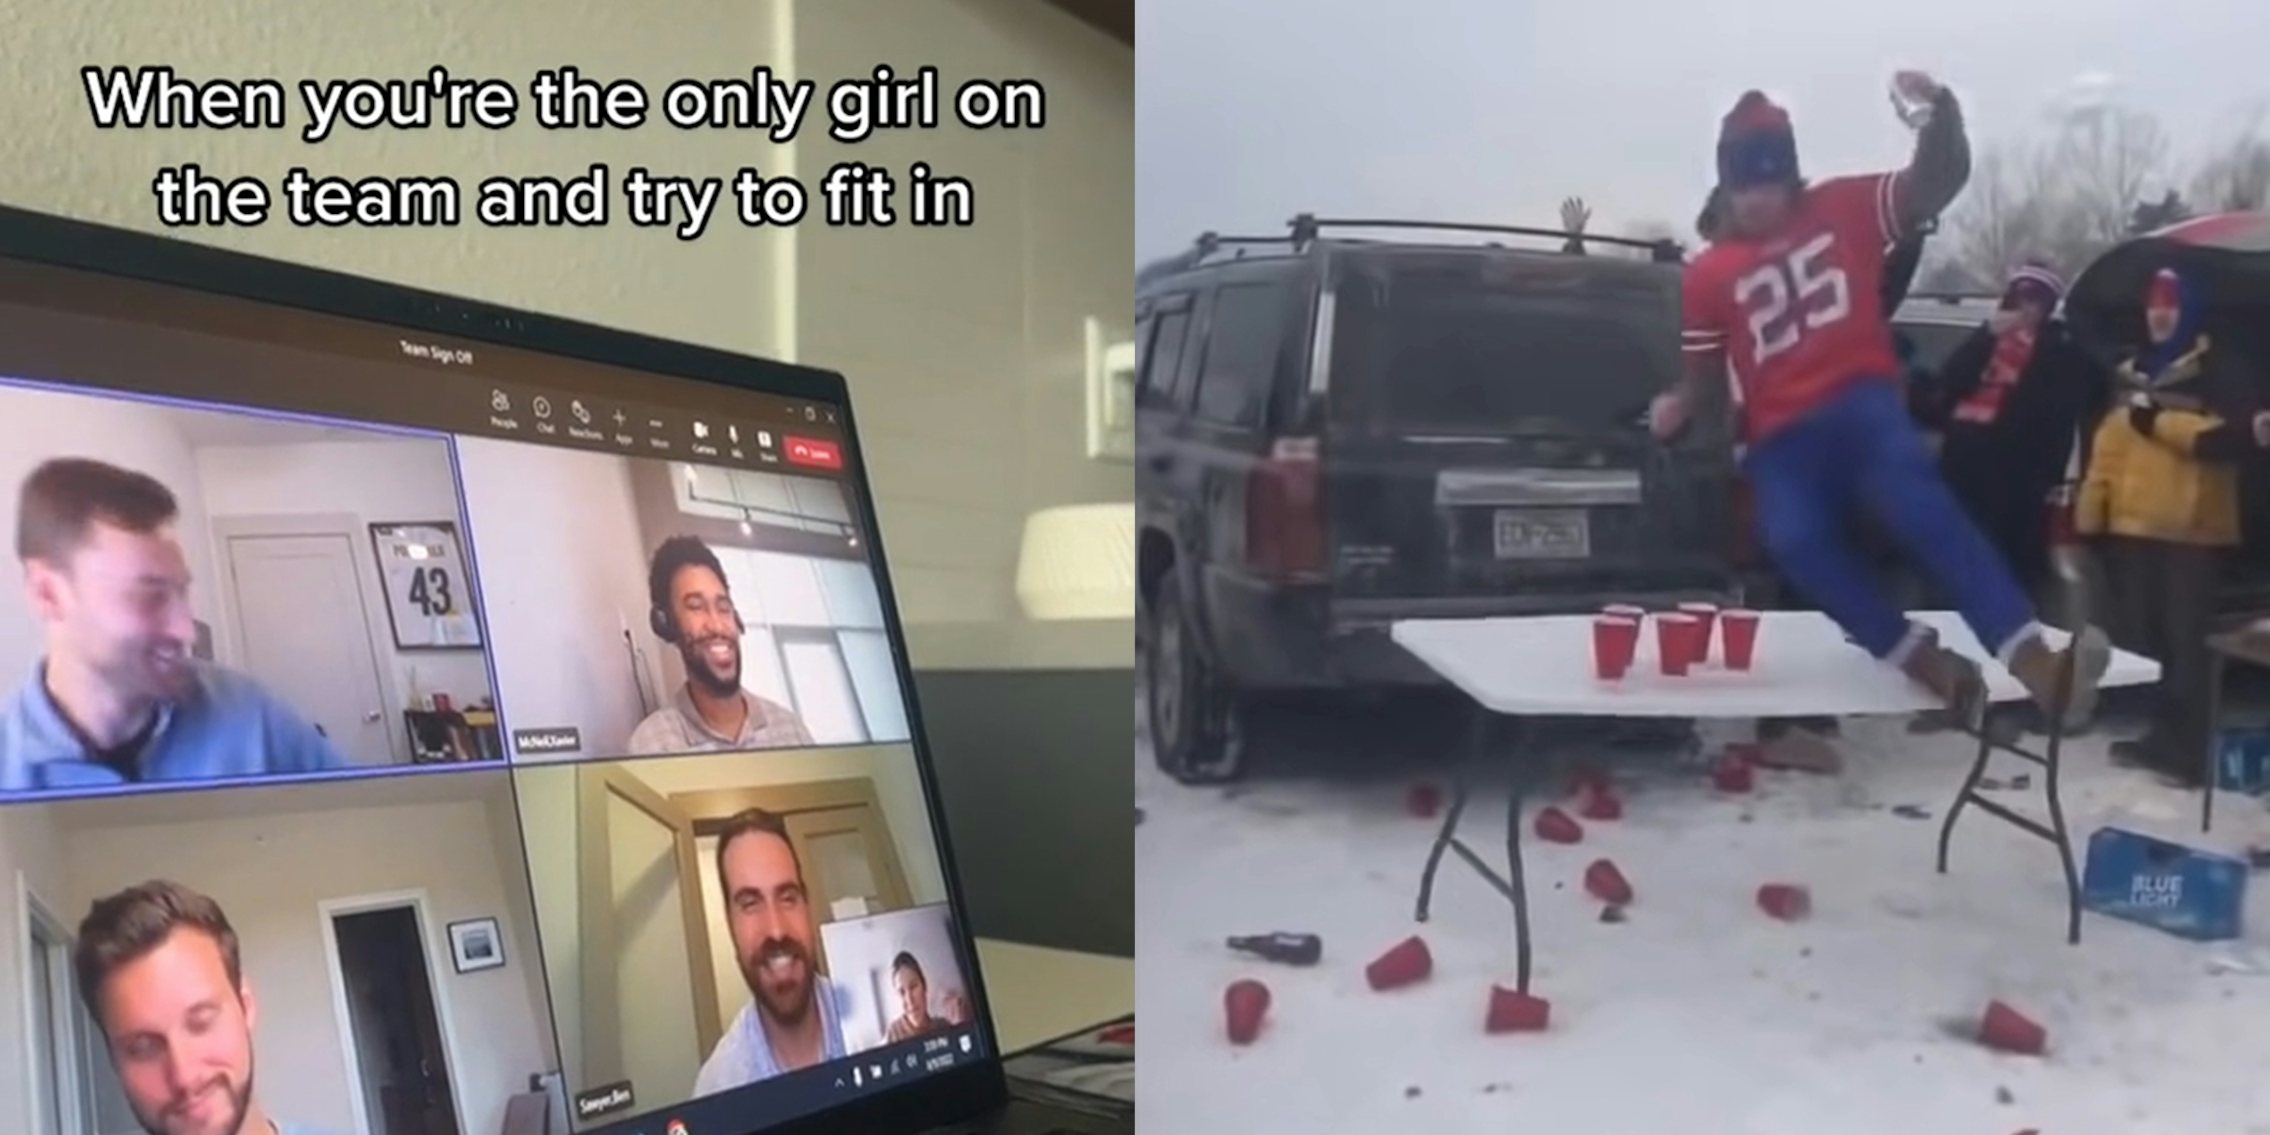 video meeting with four men and one woman captioned 'When you're the only girl on the team and try to fit in' (l) man in Buffalo Bills gear jumping onto folding table from car (r)